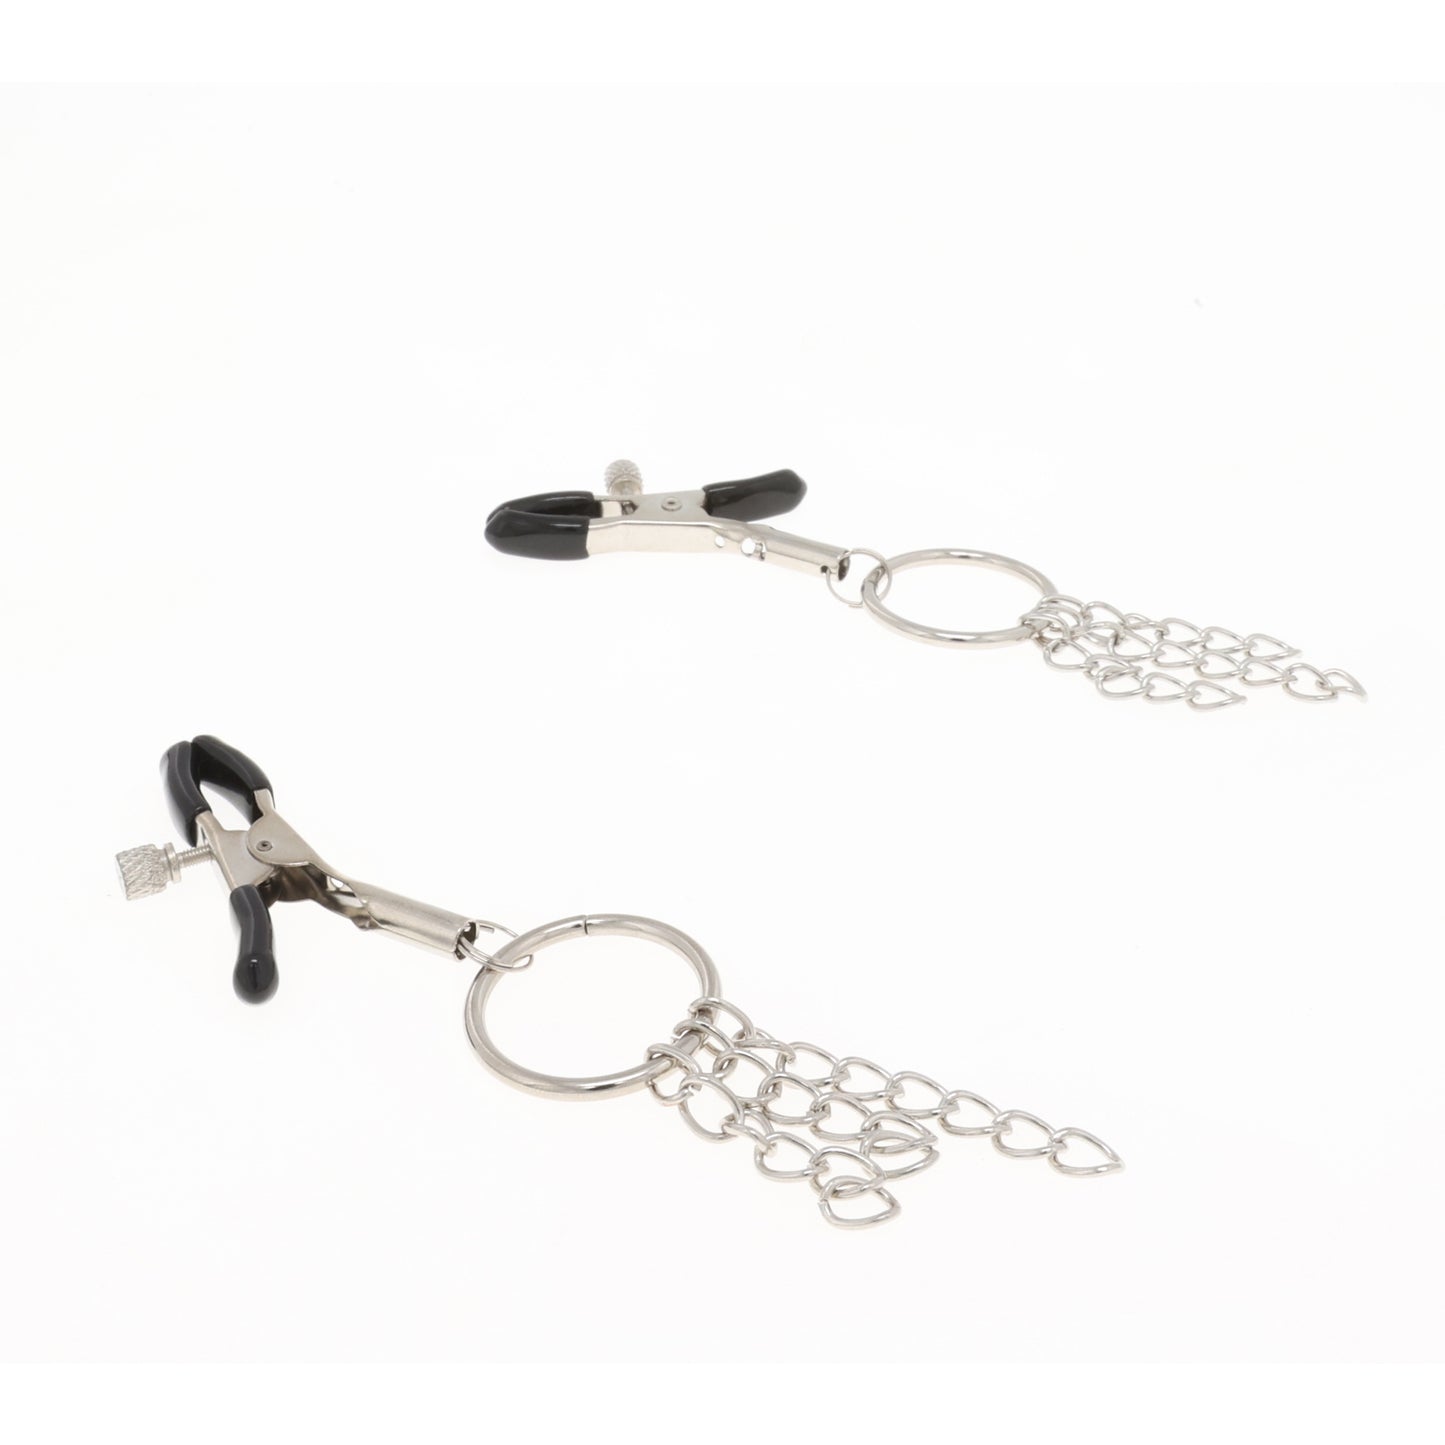 EFFECTIVE BEHAVIOR ADJUSTABLE NIPPLE CLAMPS W/ RING AND CHAIN